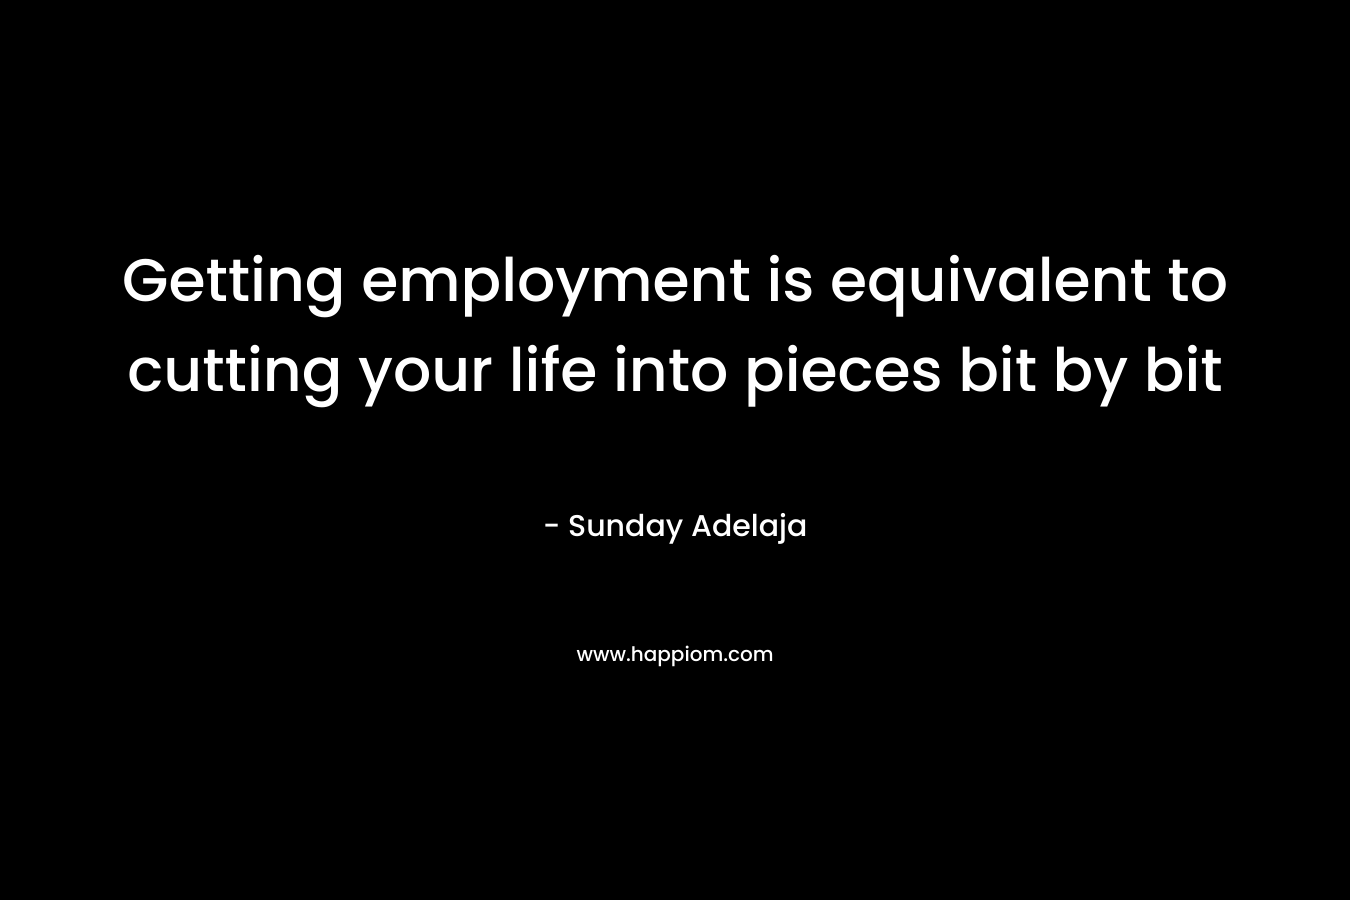 Getting employment is equivalent to cutting your life into pieces bit by bit